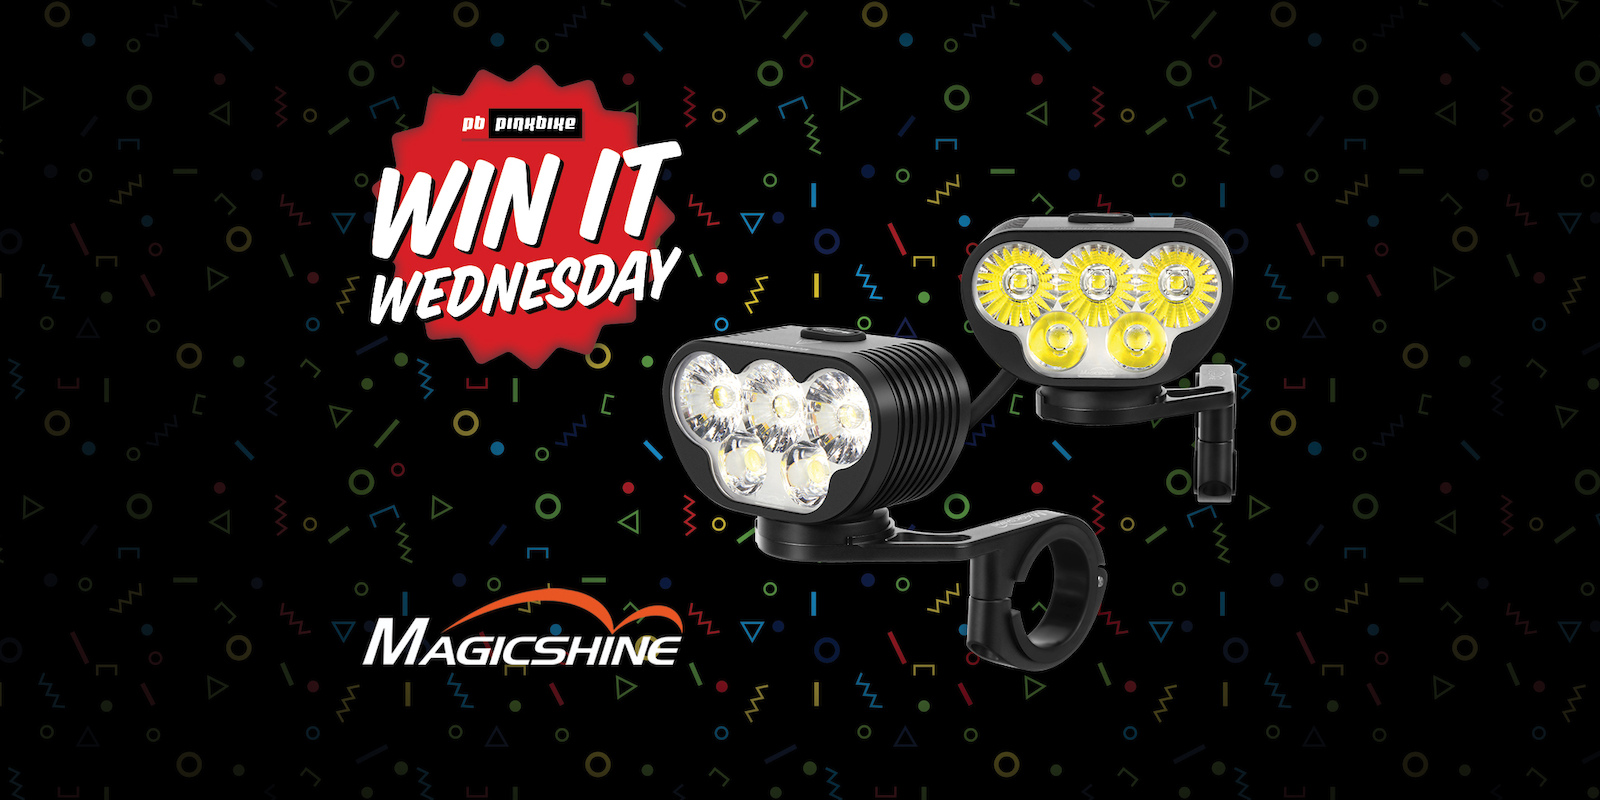 Contest Closed: Win It Wednesday - Enter to Win A MagicShine Monteer 8000  Lumen Light - Pinkbike